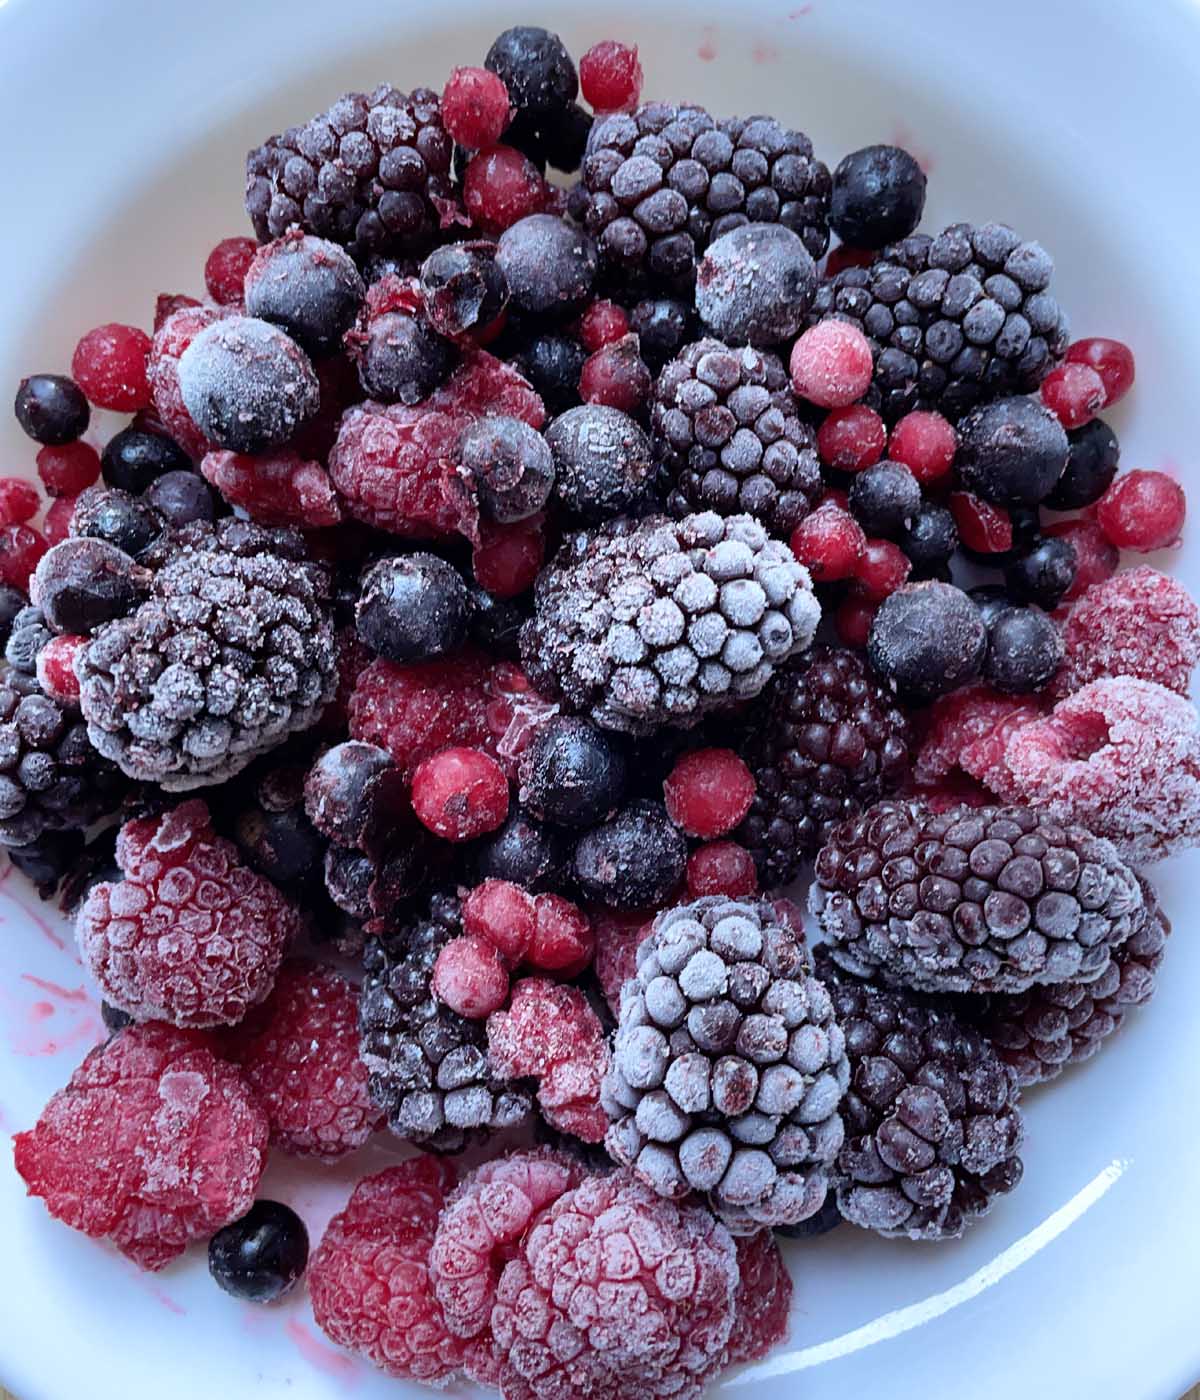 A white bowl containing frozen red and blue and purple berries.